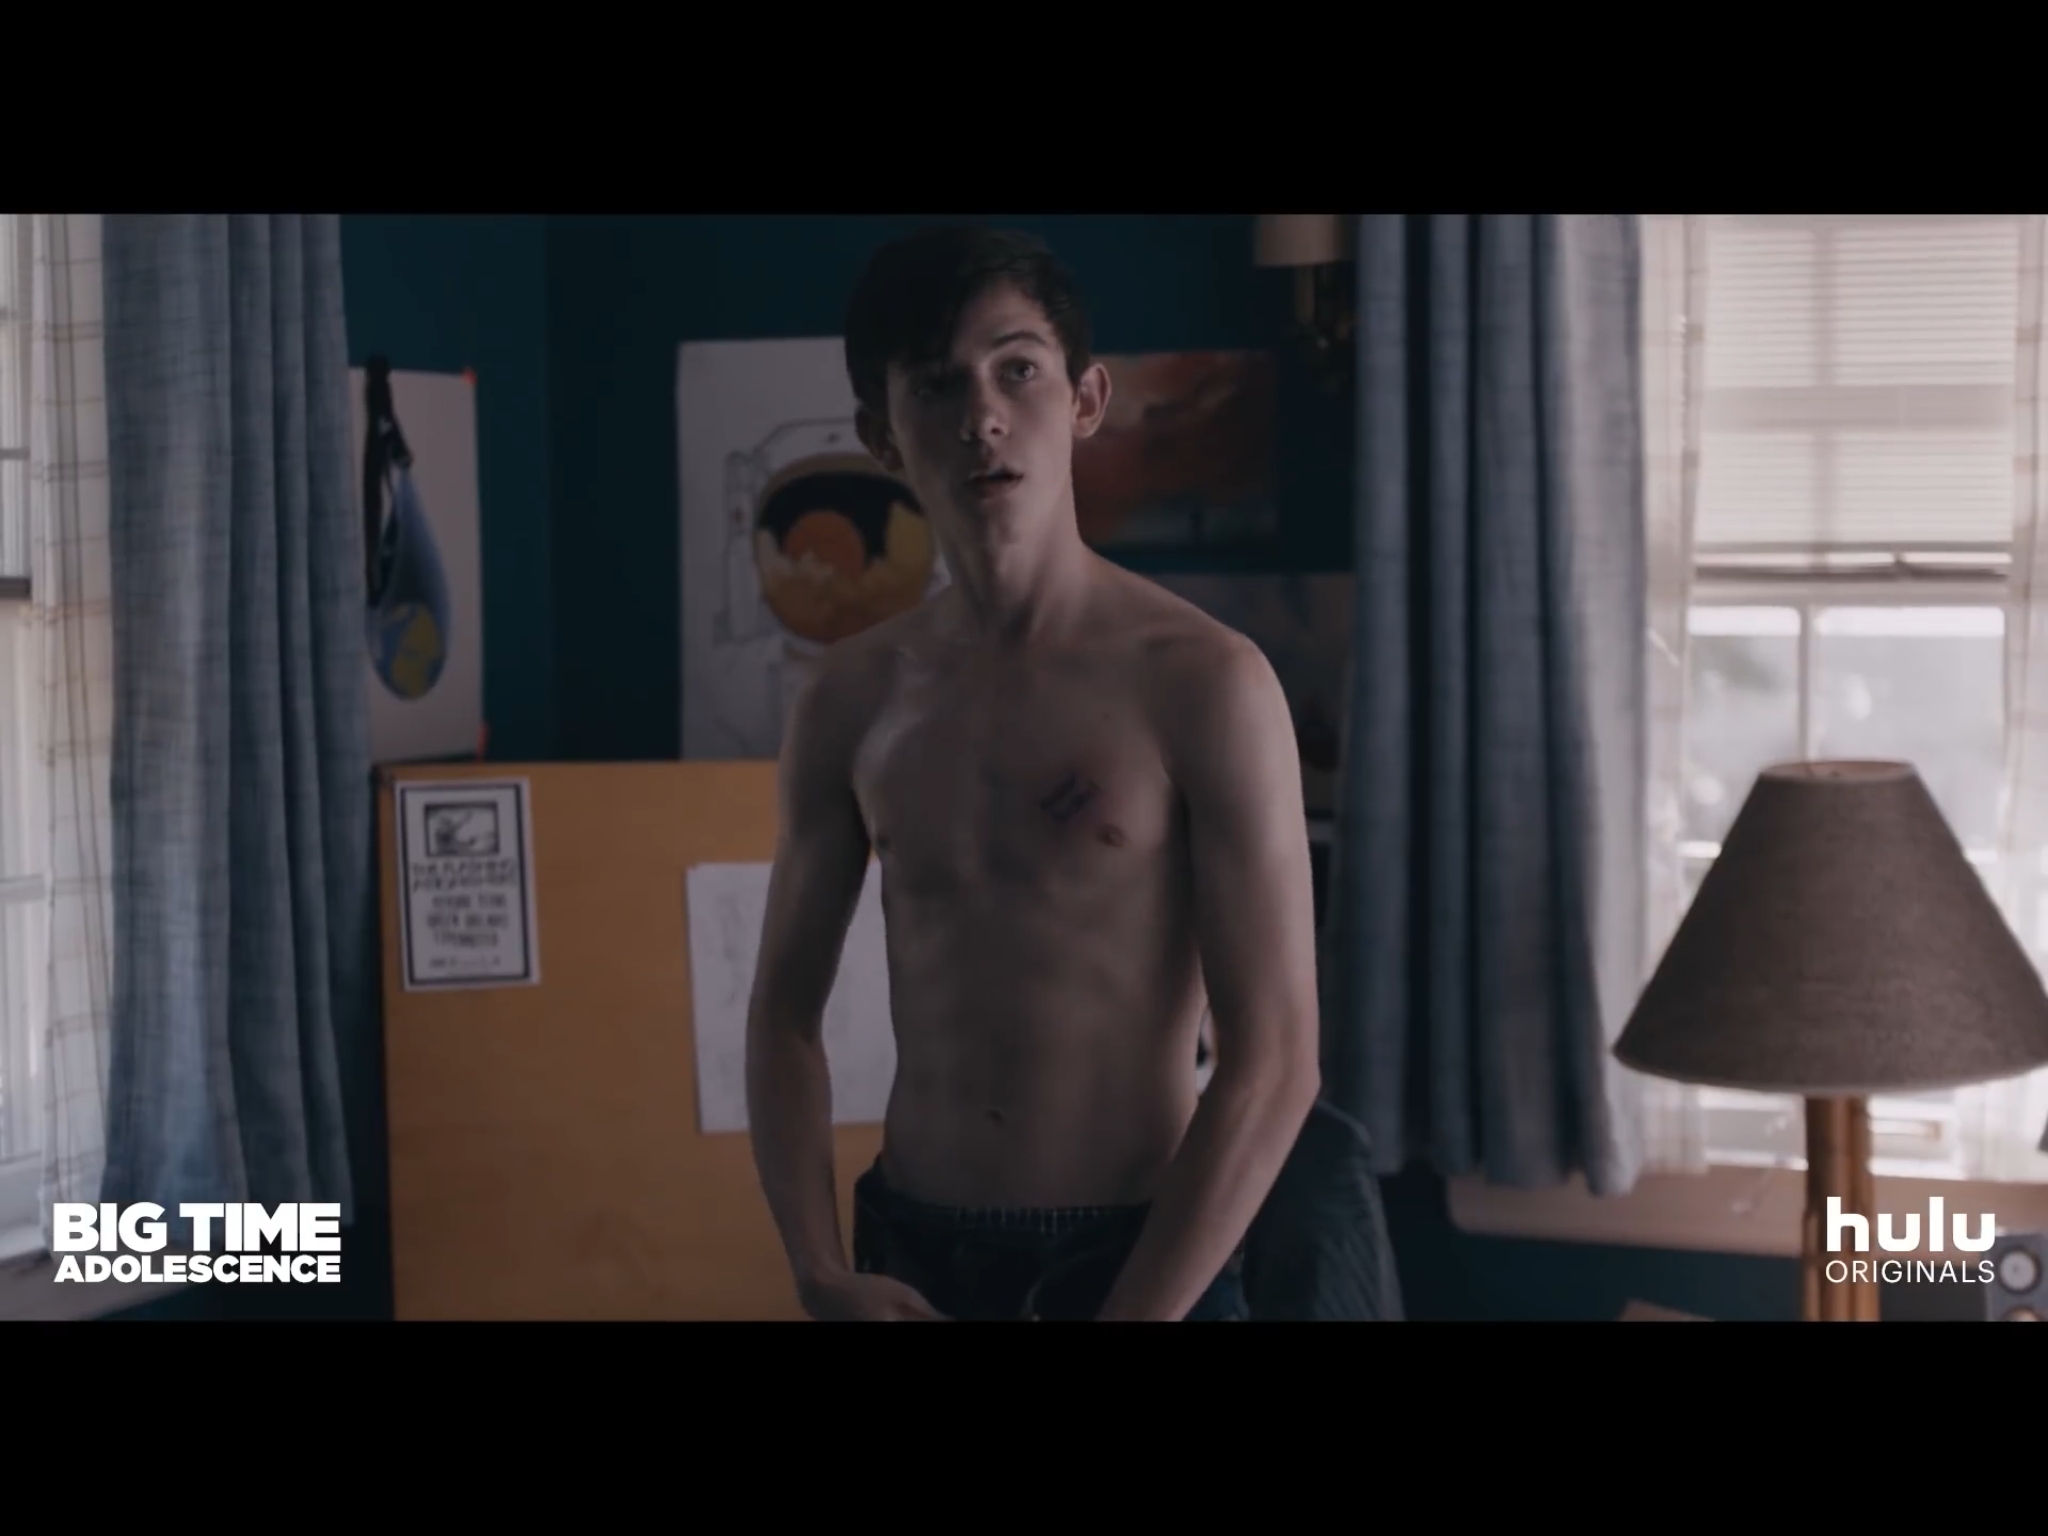 Griffin Gluck in Big Time Adolescence